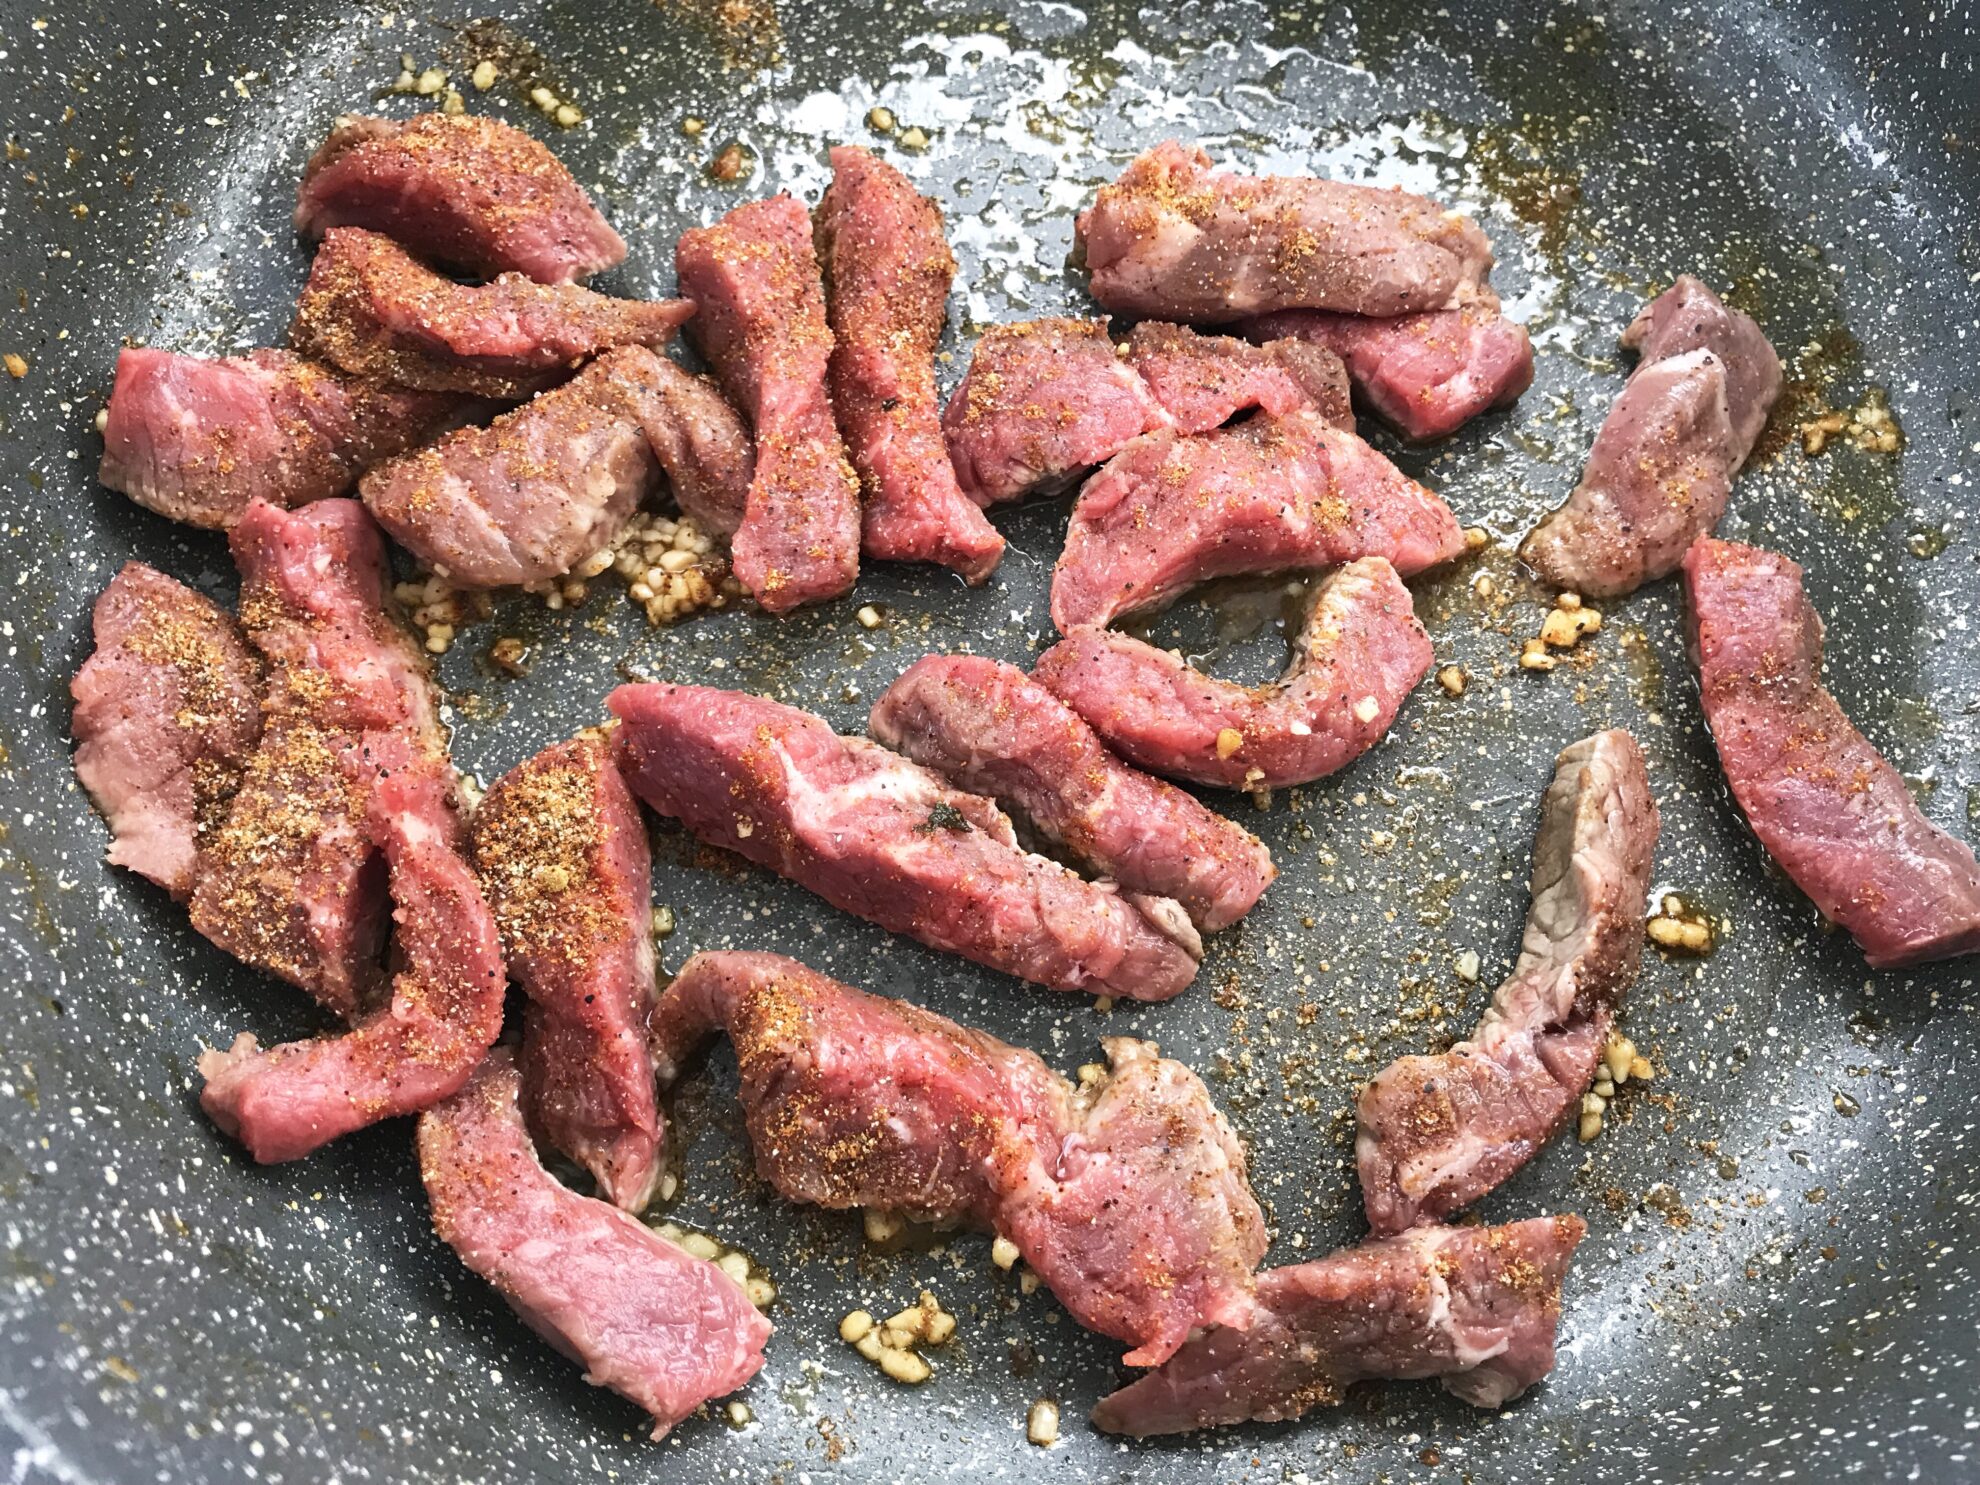 Forget eating out at your favorite Mexican restaurant and make your own Steak Fajitas at home. Find all the goodness at 5DollarDinners.Com!